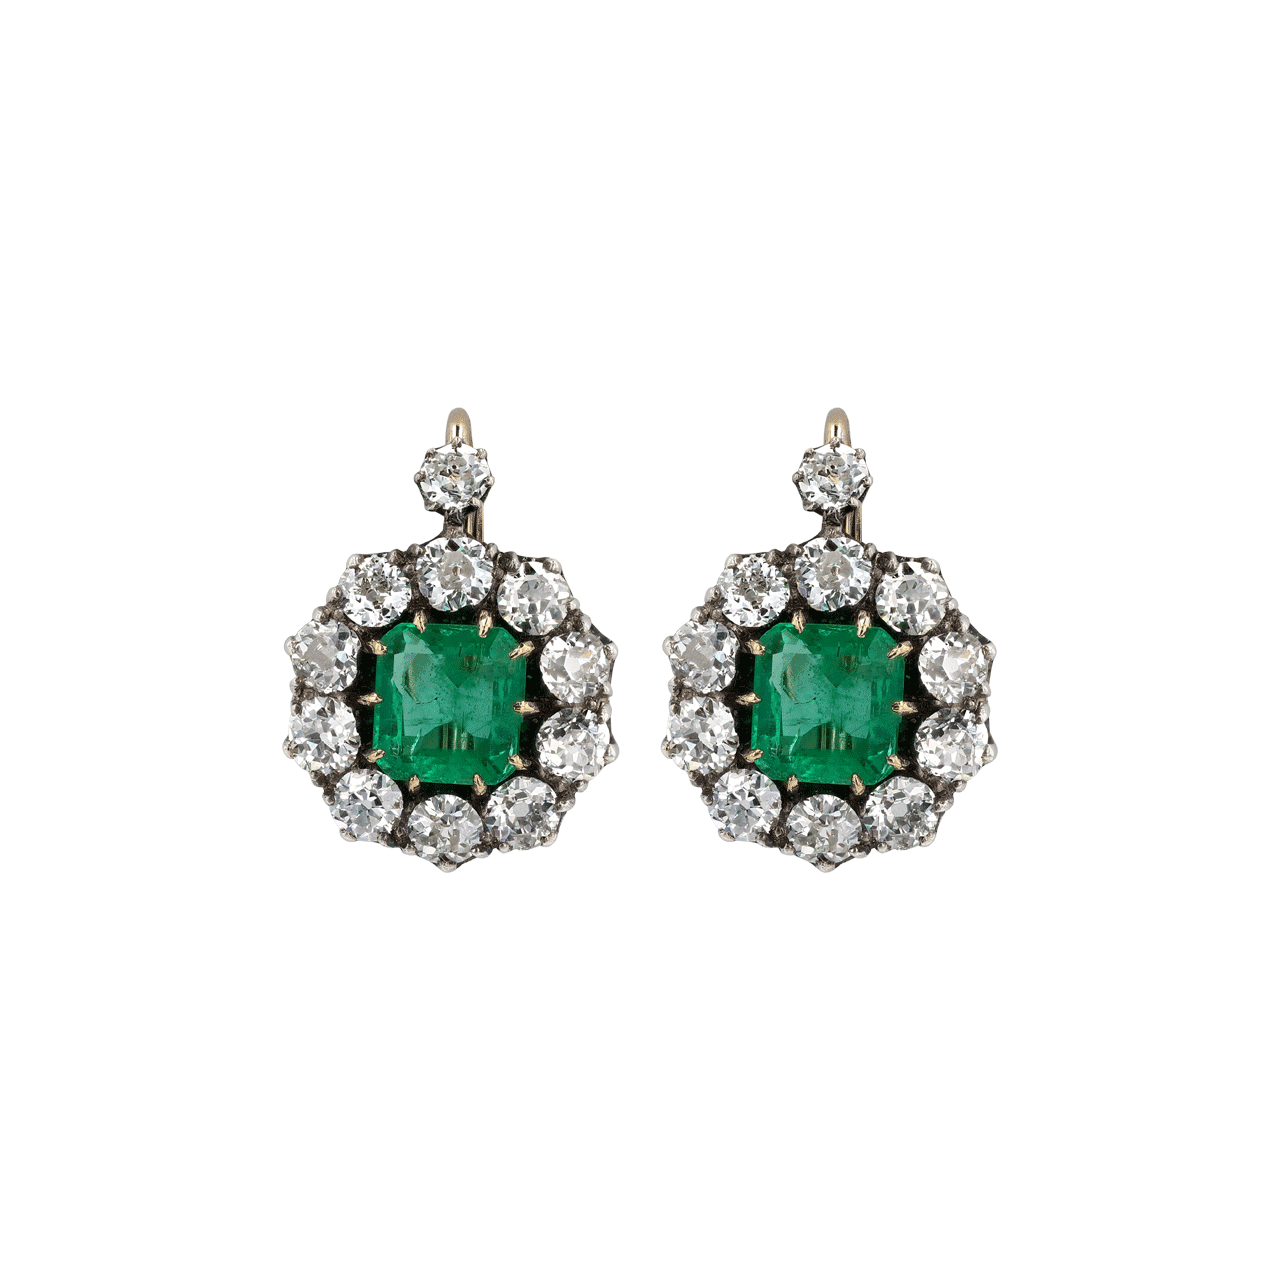 Vintage 14Y silver topped emerald and diamond earrings